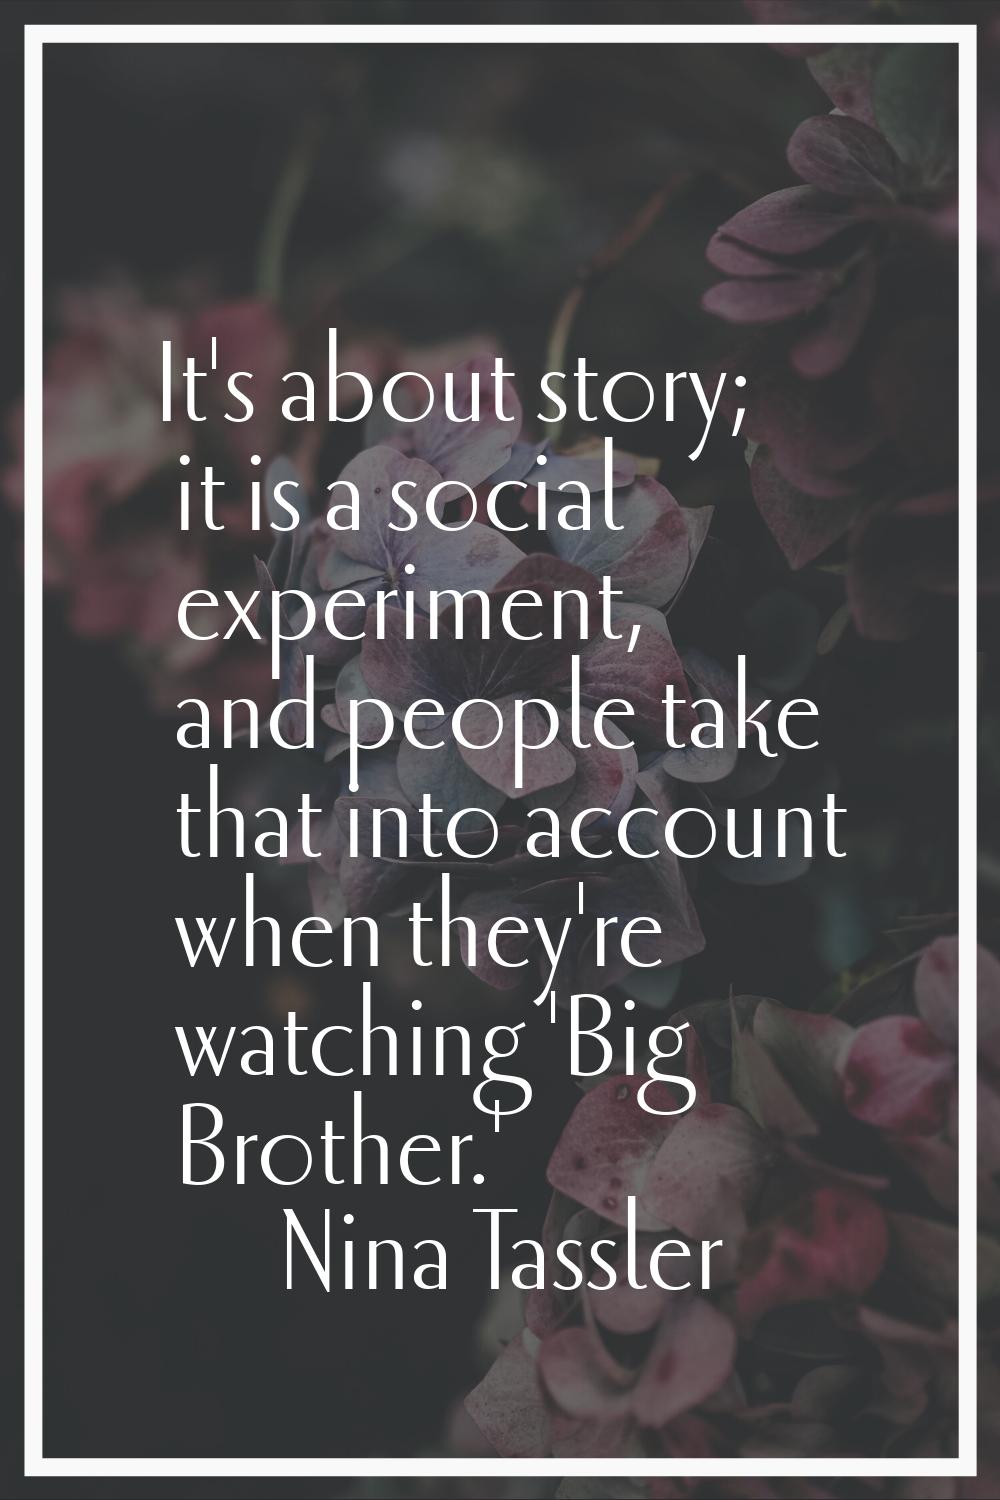 It's about story; it is a social experiment, and people take that into account when they're watchin